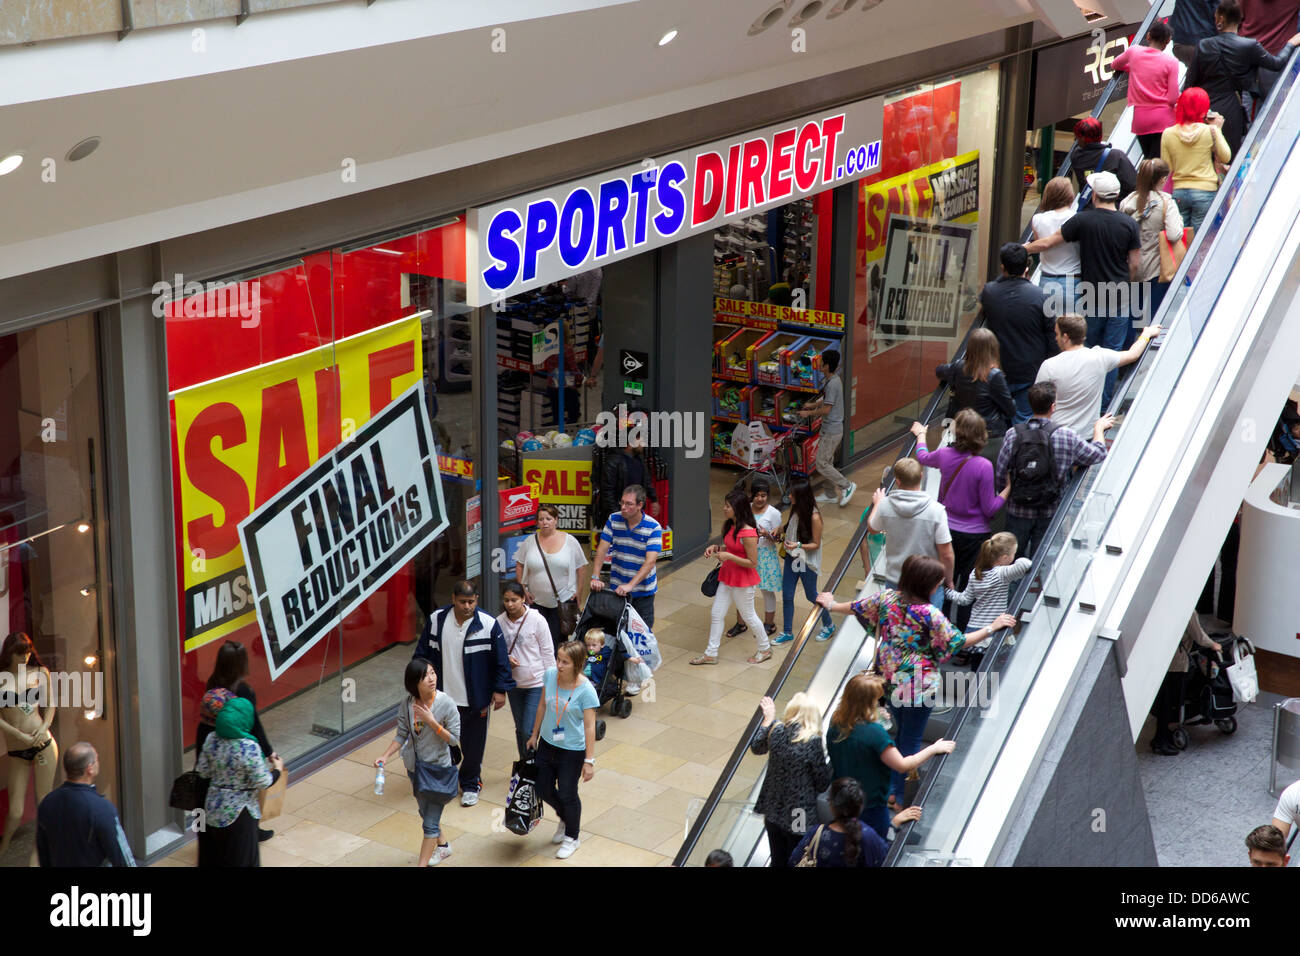 Sports Direct in Shopping Mall Stock Photo